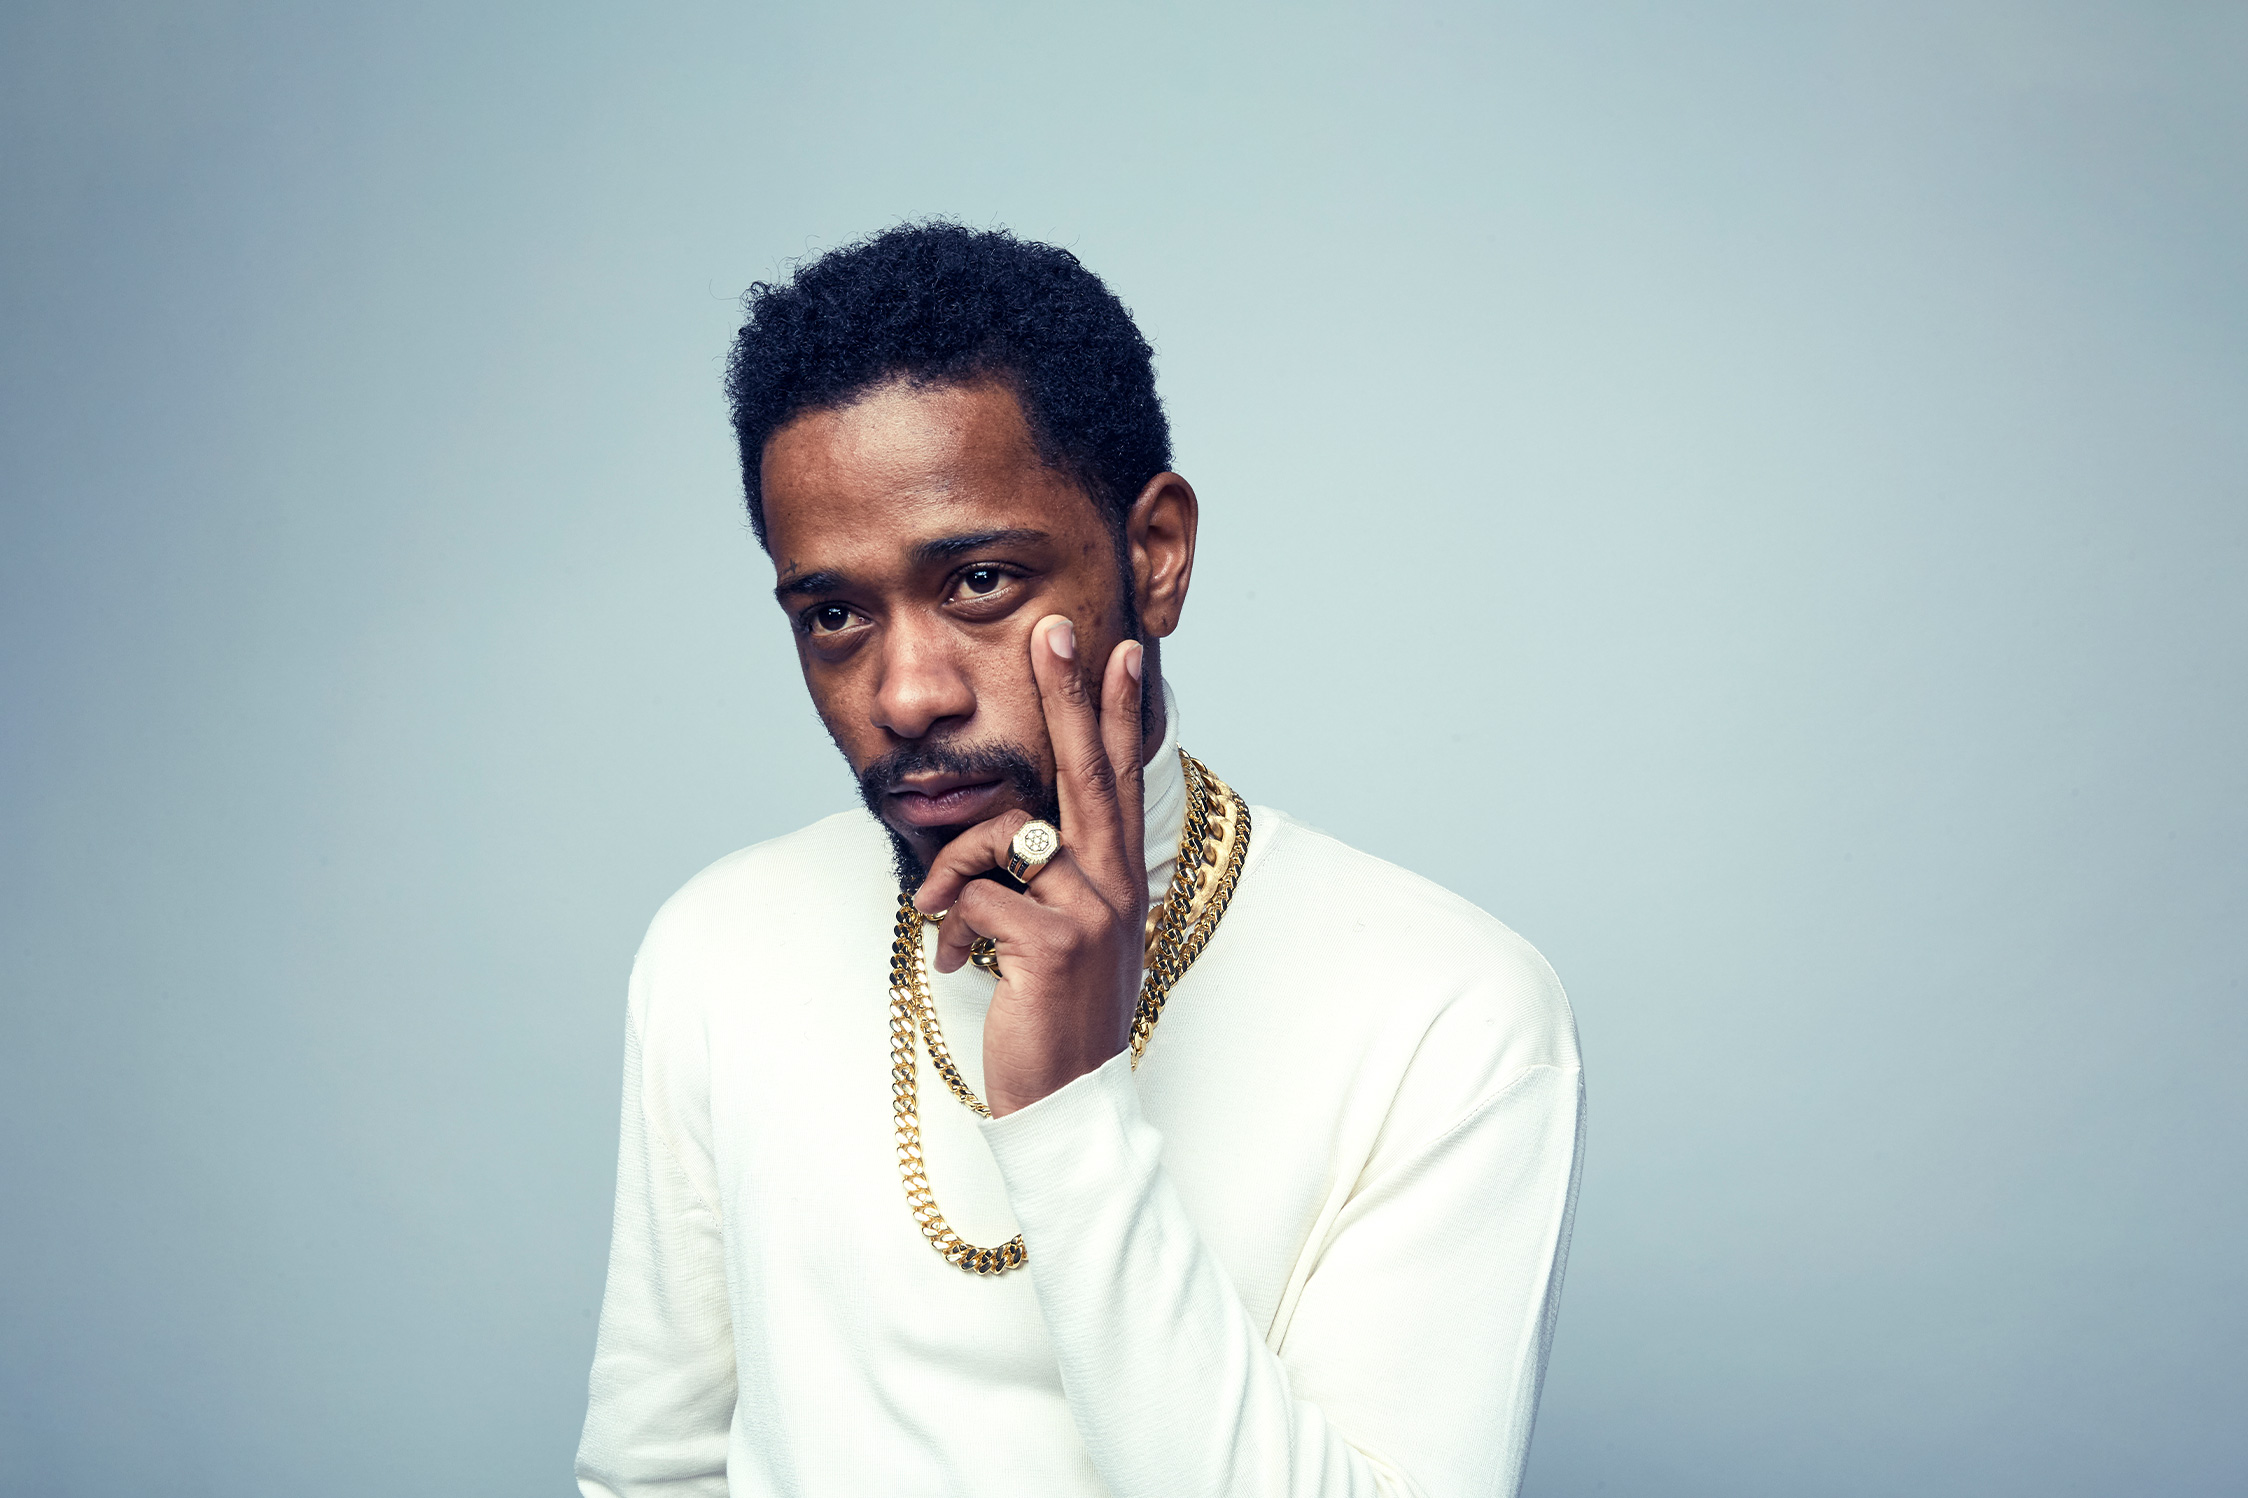 LaKeith Stanfield Is Ready to Make You Uncomfortable - RELEVANT